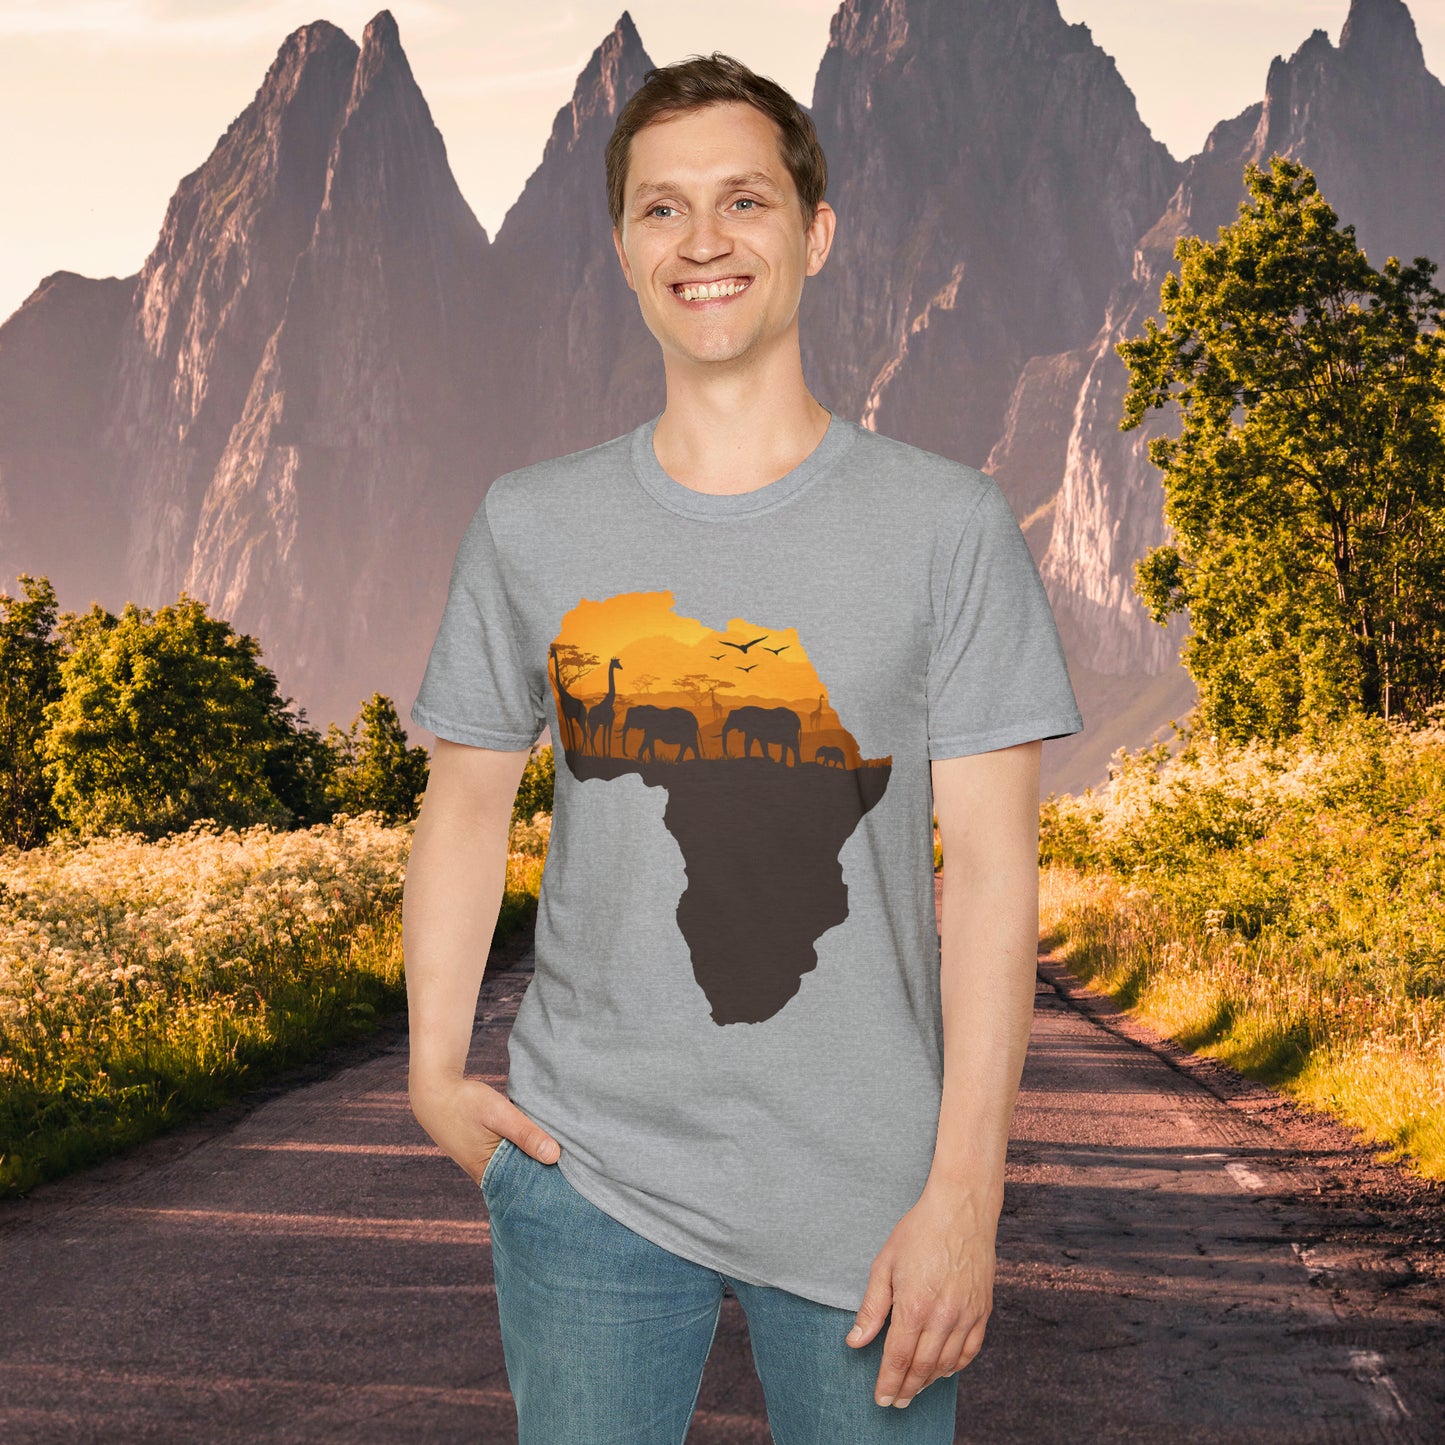 I love Africa and all its natural beauty, history and peoples inspire the design on this Unisex Softstyle T-Shirt. Giraffe, elephants, love all of them!